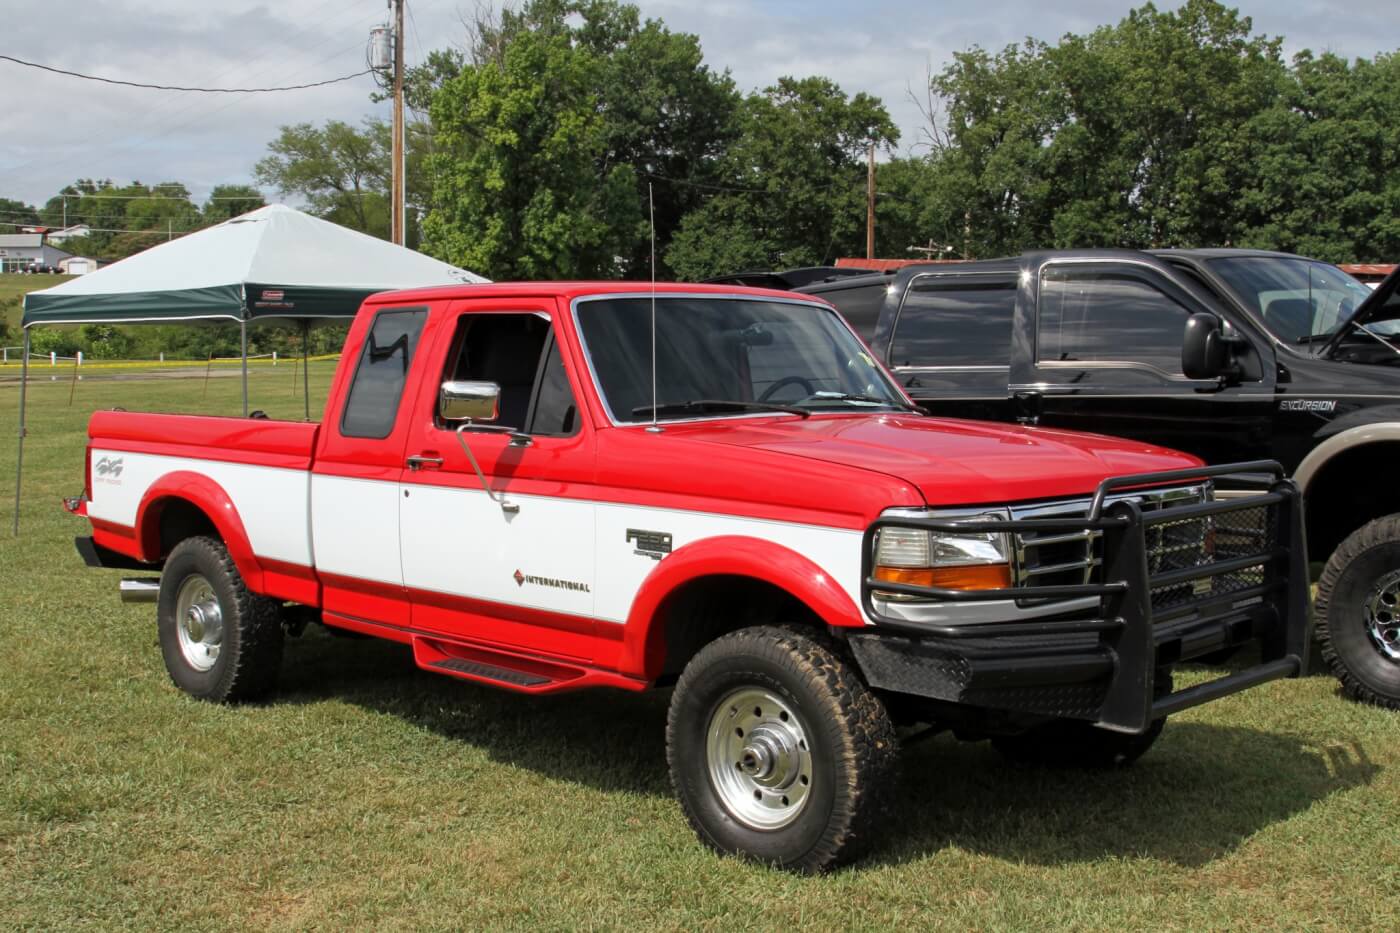 Christian Carrier’s immaculate two-tone OBS truck won the Best Work Stock truck and People’s Choice awards.